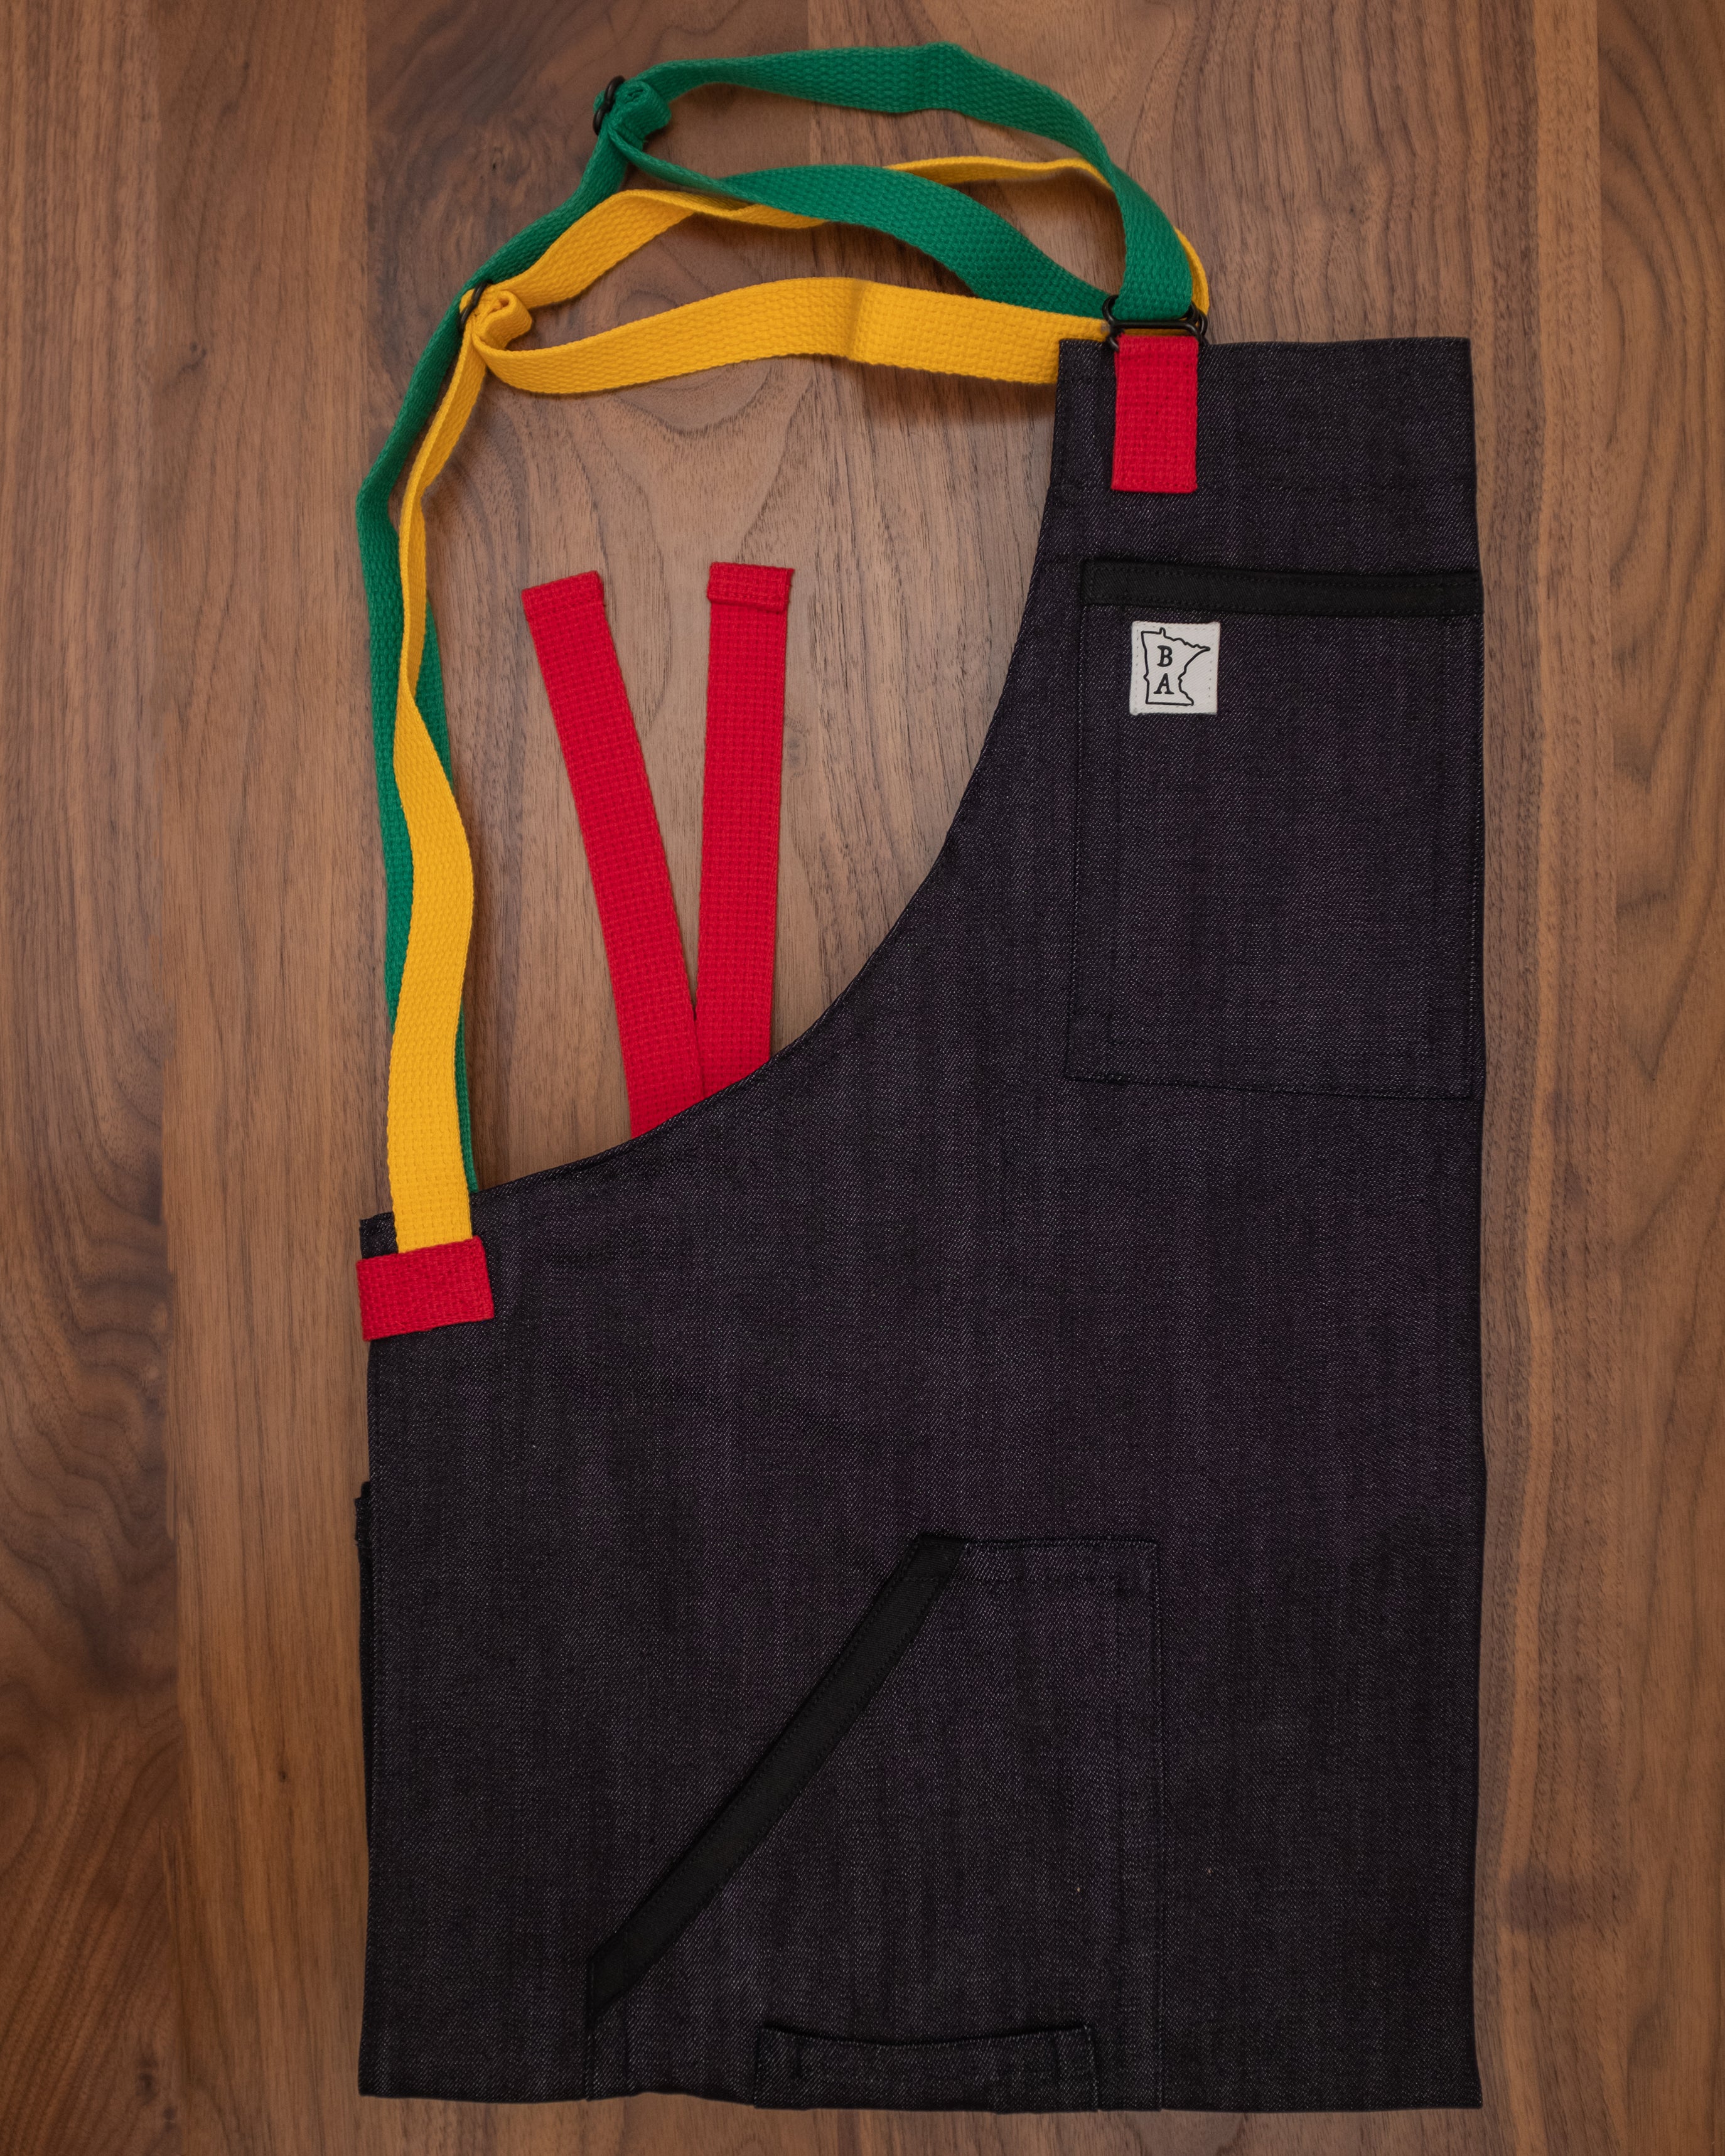 Denim apron with black trimming on the pockets and a trio of red, yellow, and green strapping folded on a wooden surface. The apron design Marley was manufactured in Minnesota by Craftmade Aprons. 